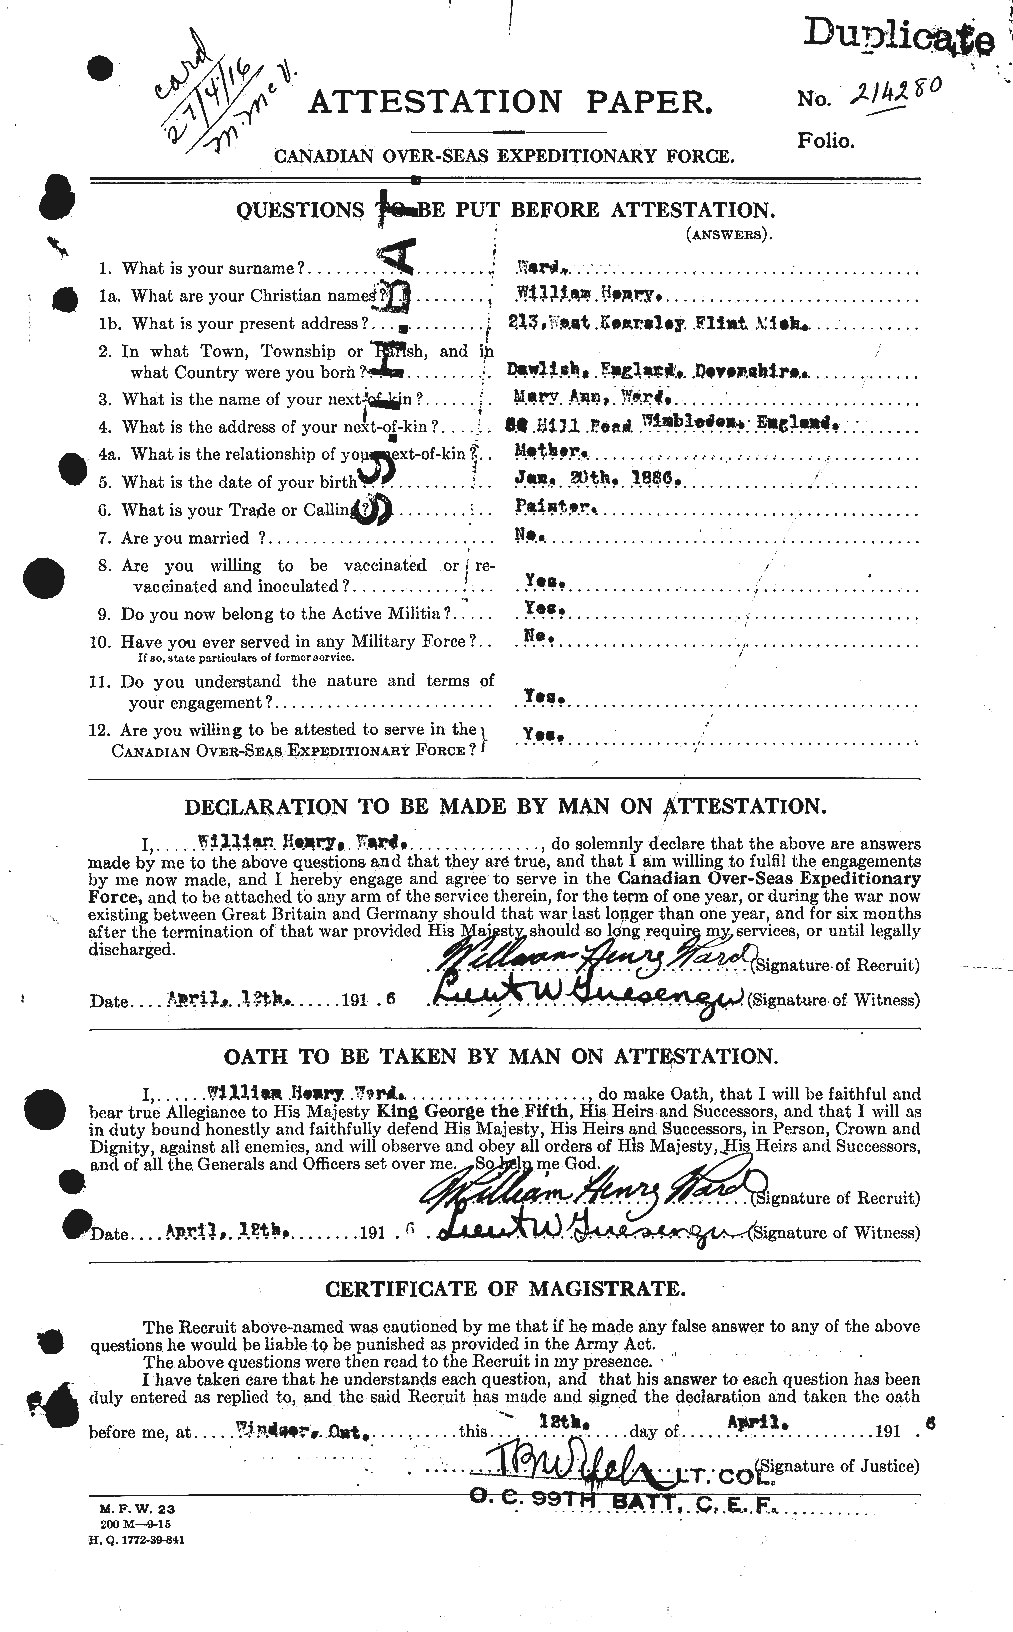 Personnel Records of the First World War - CEF 659822a